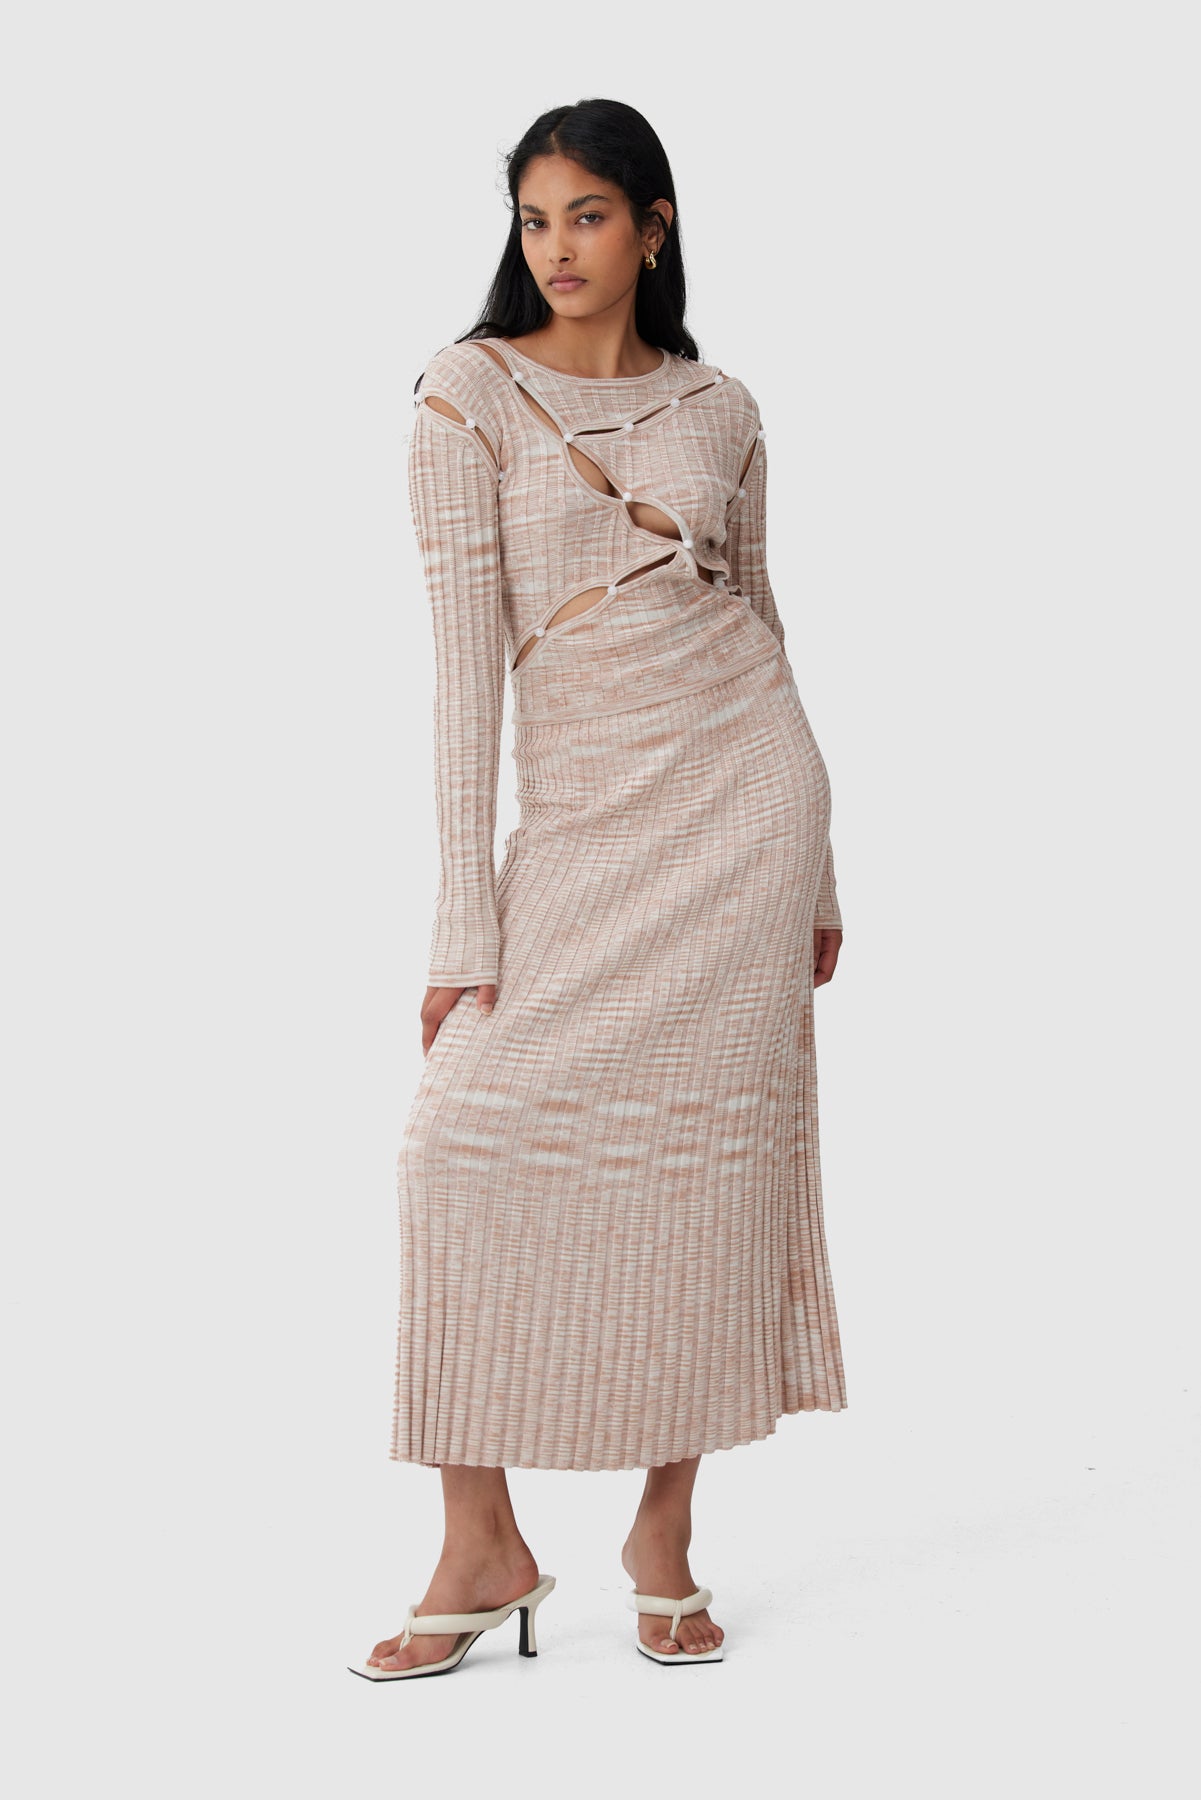 C/MEO Collective - Eventually Knit Skirt - Tan Marle